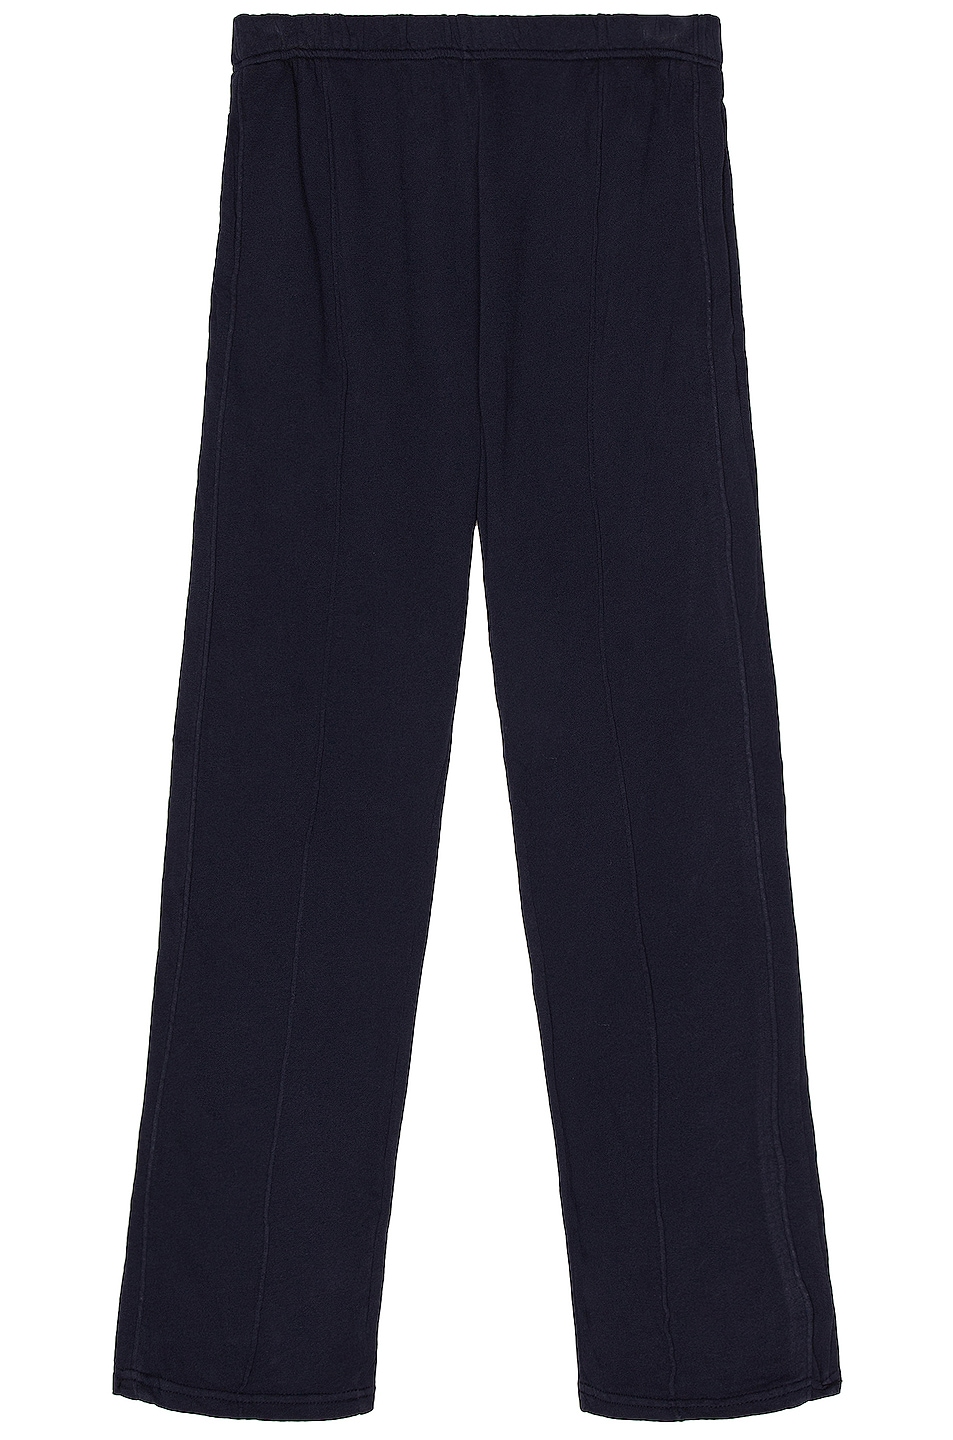 Image 1 of Les Tien Light Weight Lounge Pant Wide Leg in Navy